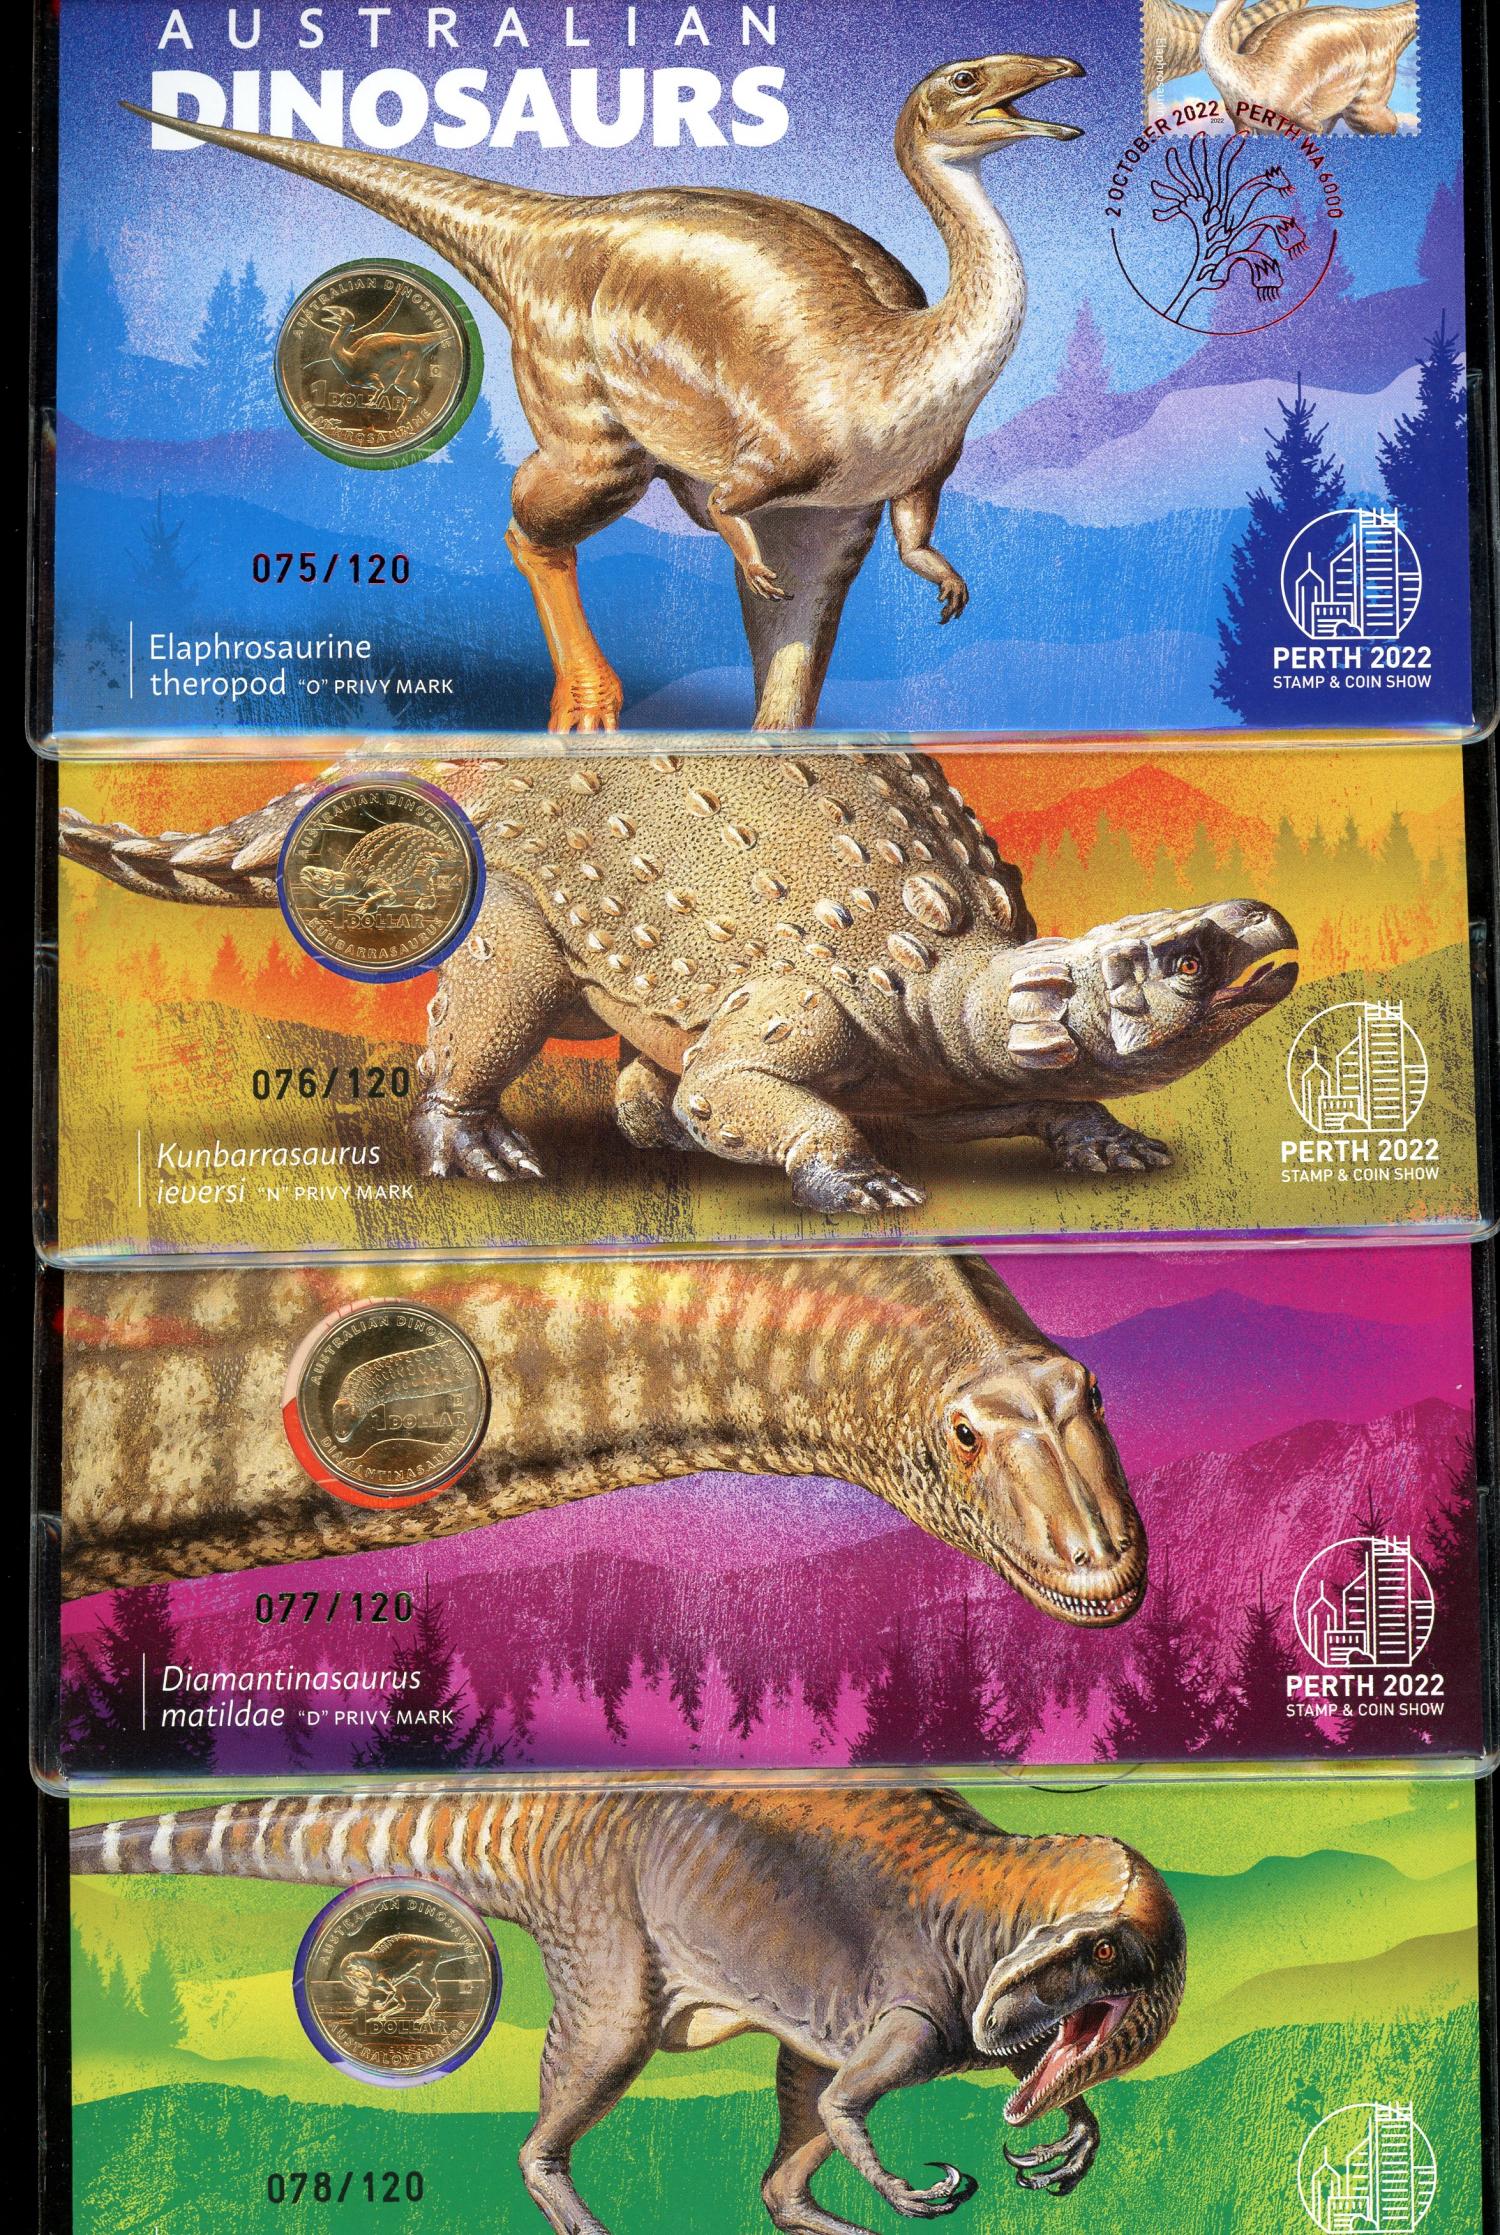 Thumbnail for 2022 Australian Dinosaurs Set of 4 PNCs 075 076 077 078 - Perth Stamp and Coin Show Limited to only 120